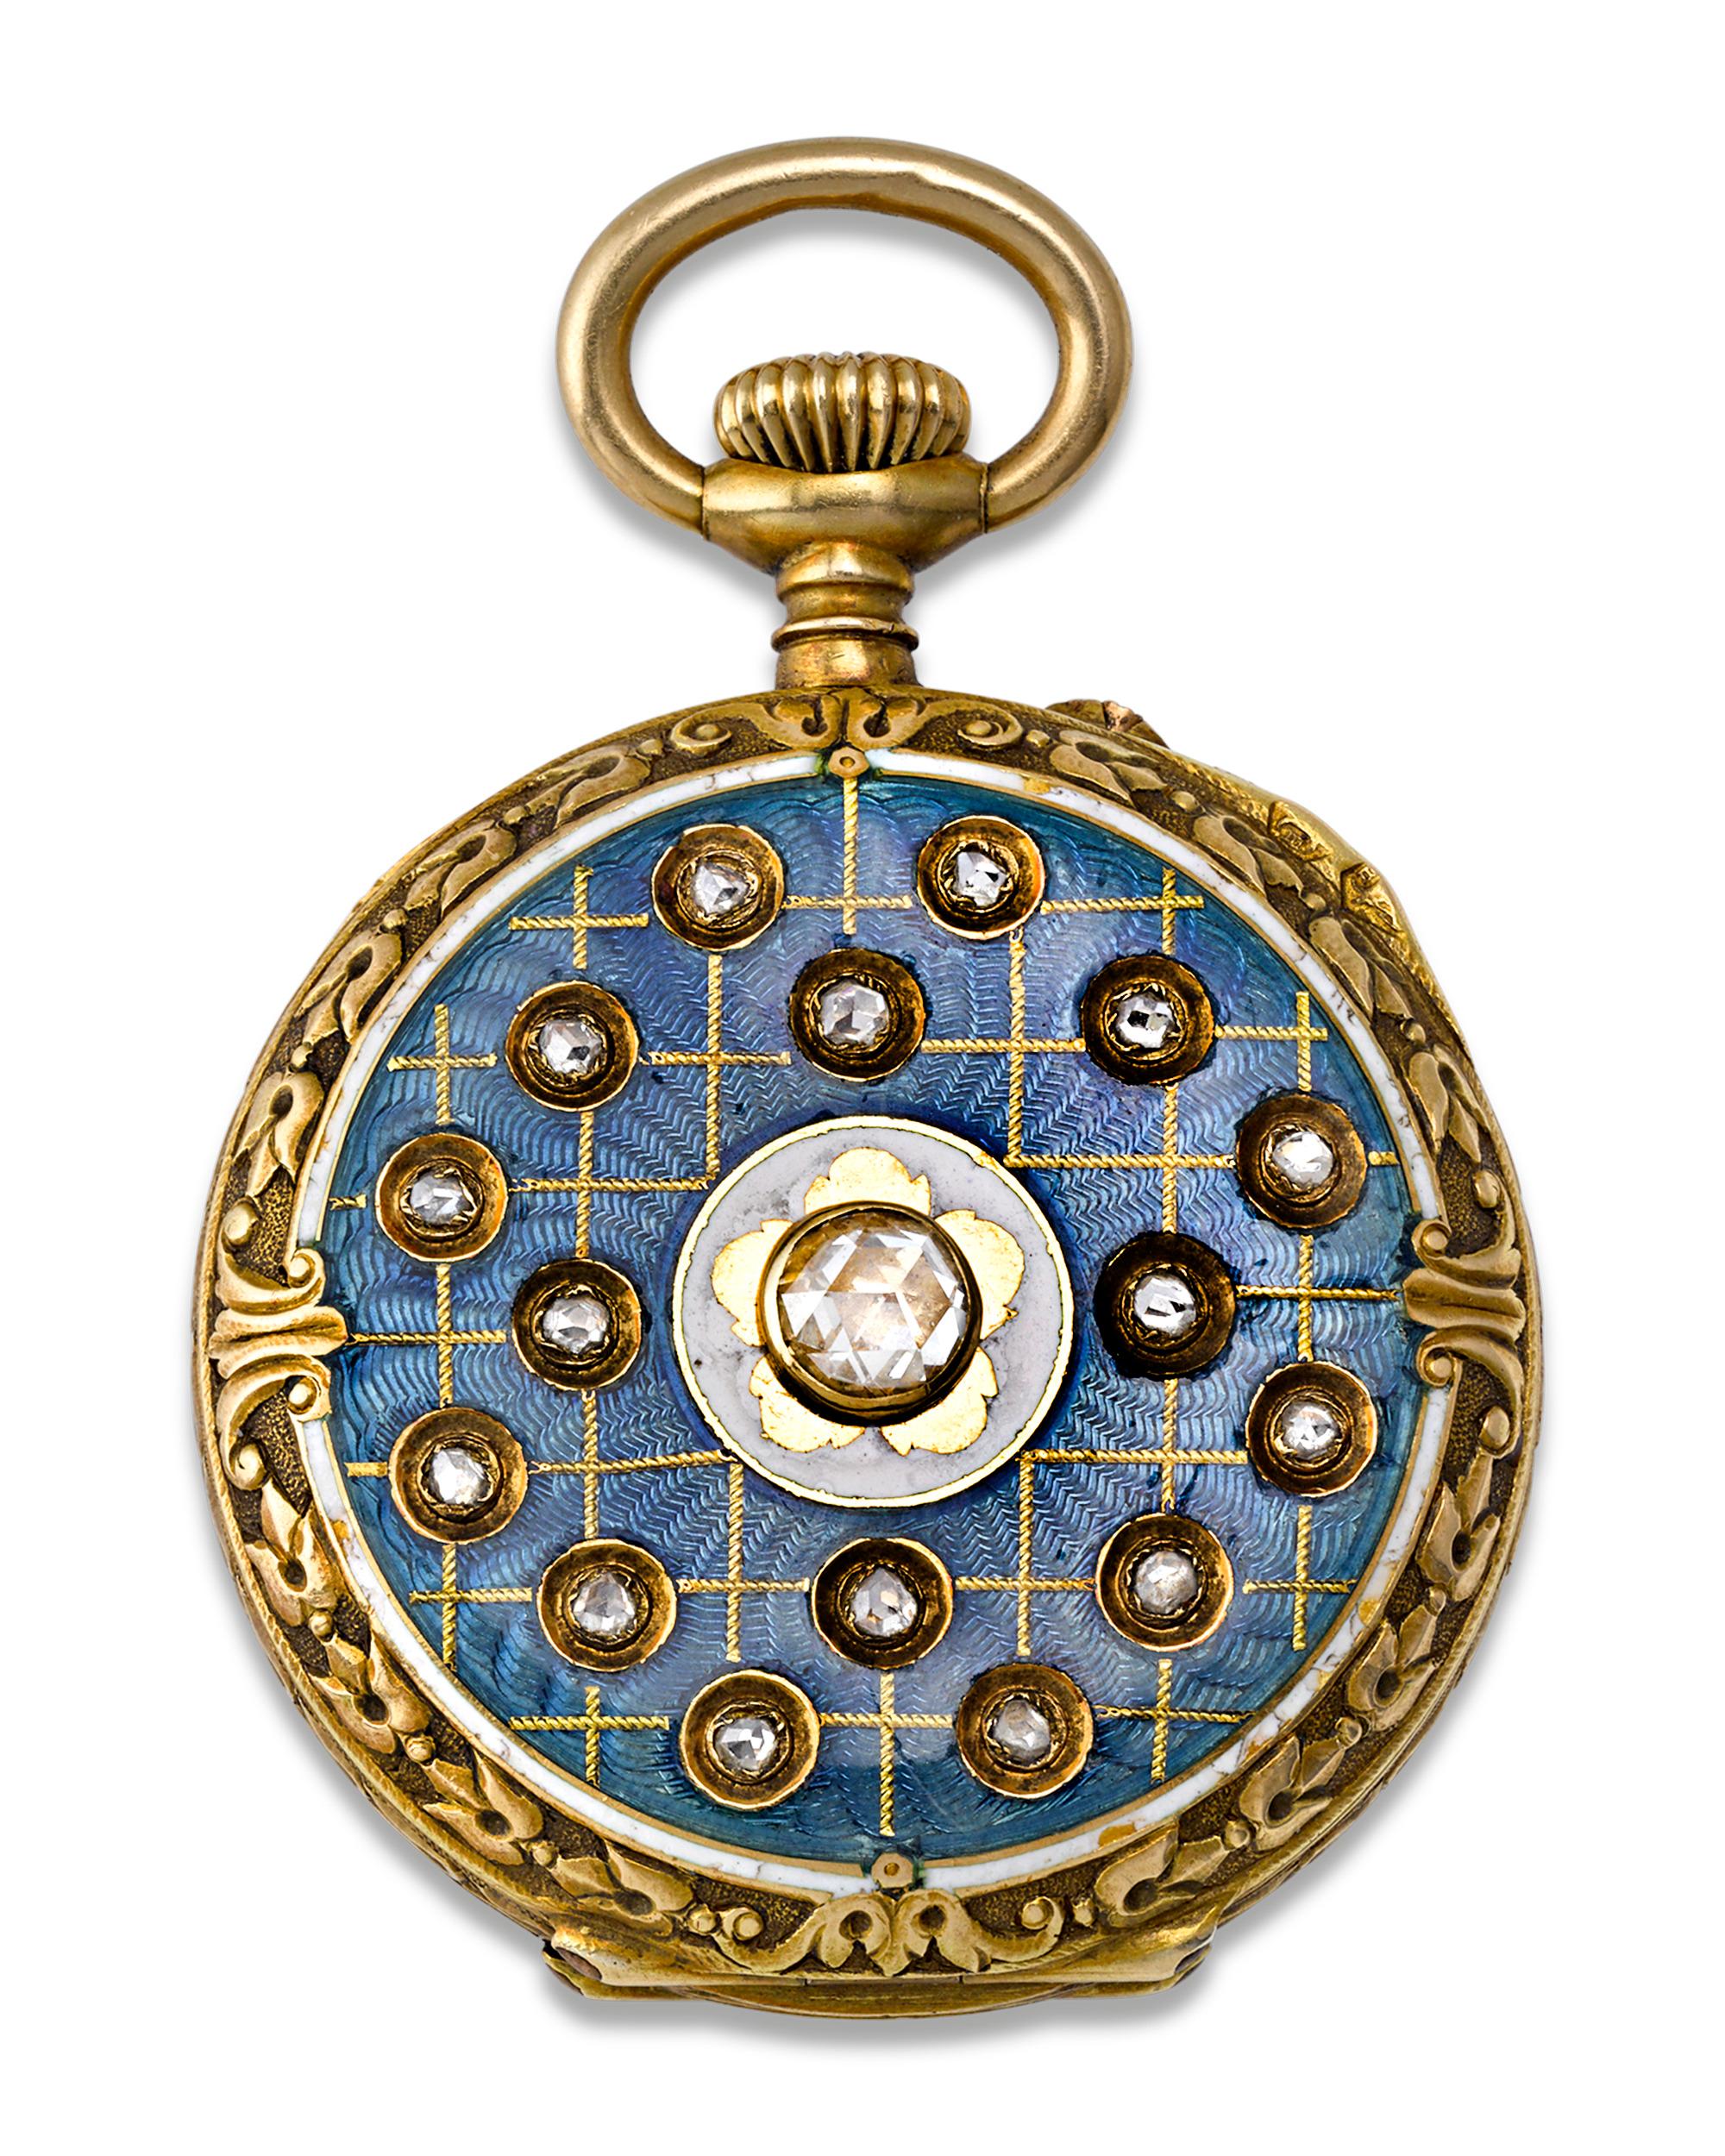 The world-famed Patek Philippe created this majestic pocket watch emphasizing elements of Art Deco in its design. The open-faced, bassine style case is crafted of 18K yellow gold with a marvelous engraved, organic motif surrounding the face. The